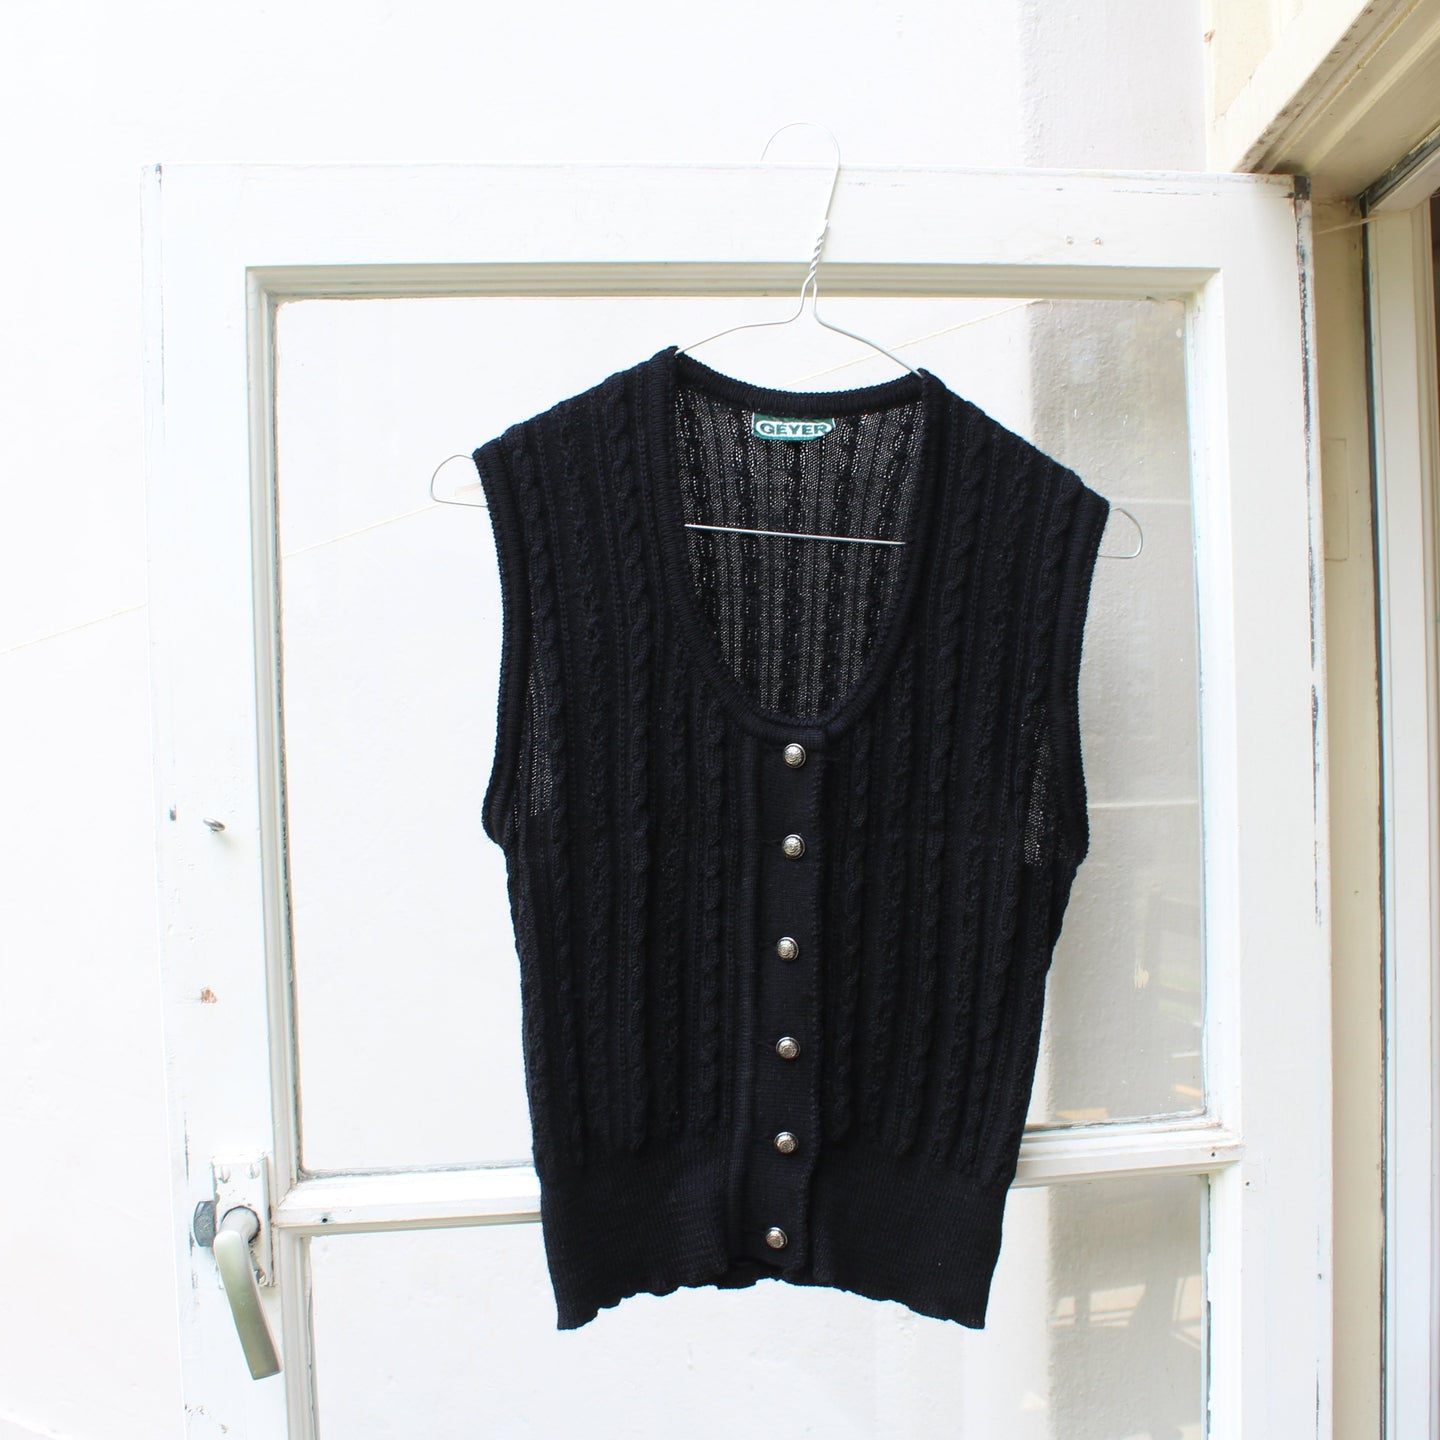 Vintage wool button up waistcoat, size S/M